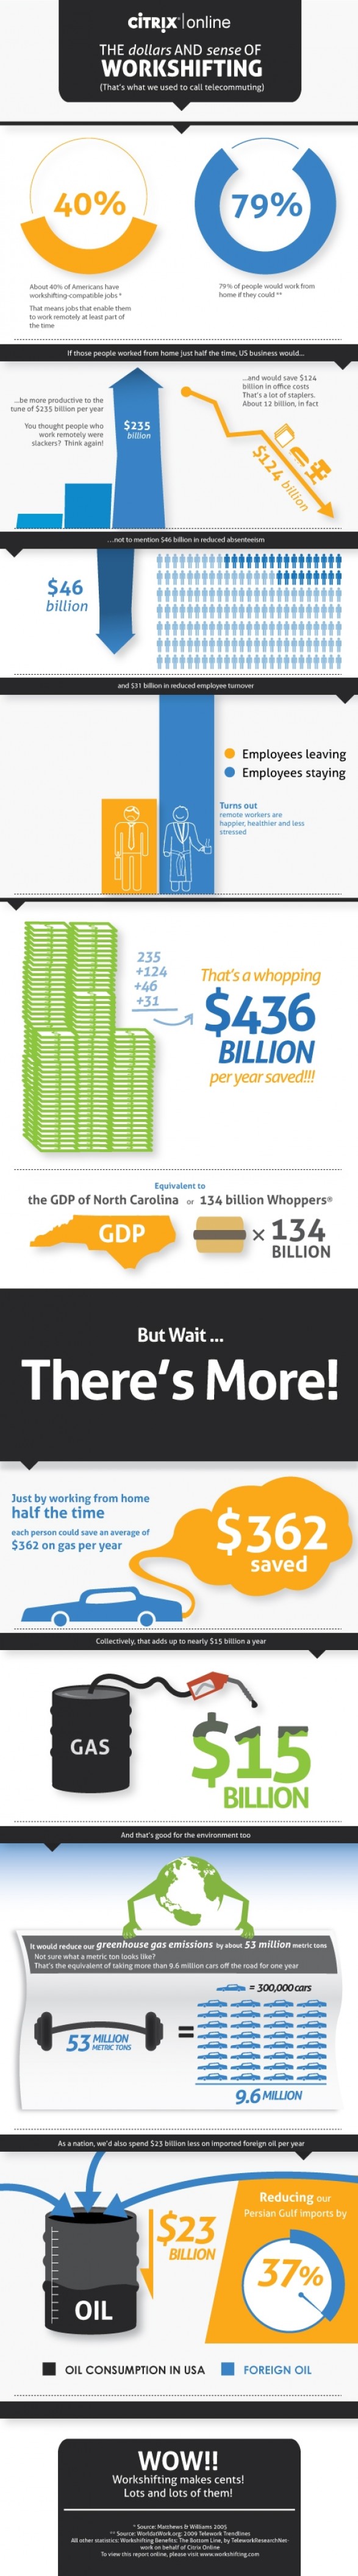 Work From Home Economic Logic Infographic